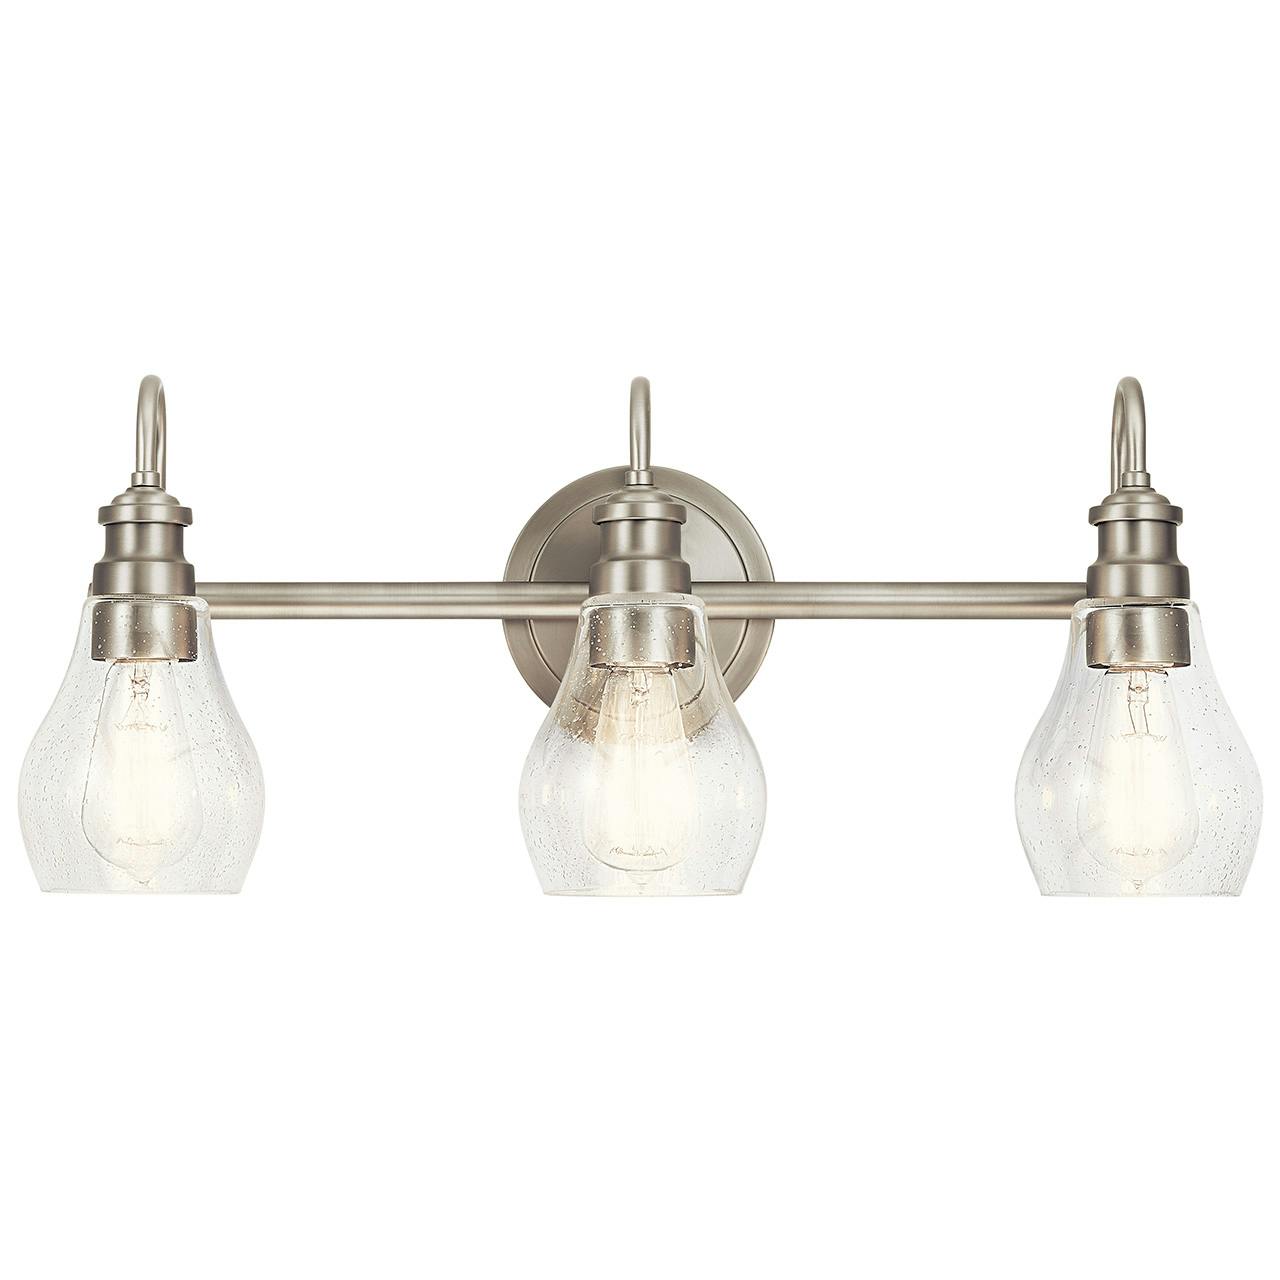 The Greenbrier™ 3 Light Vanity Light Nickel facing down on a white background